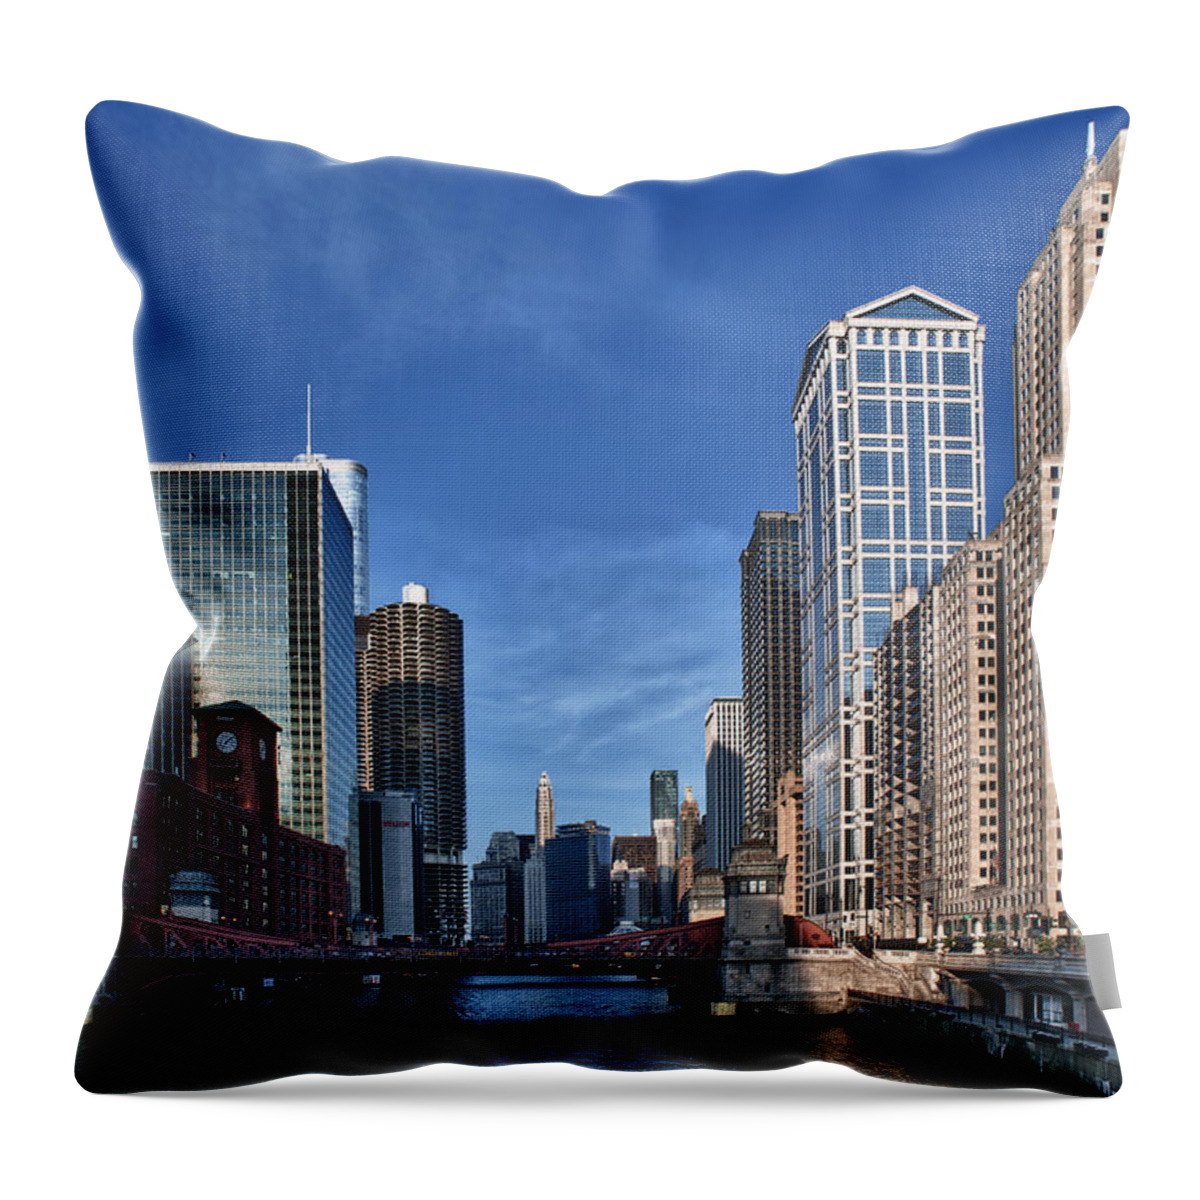 Chicago Throw Pillow featuring the photograph Chicago River by Sebastian Musial